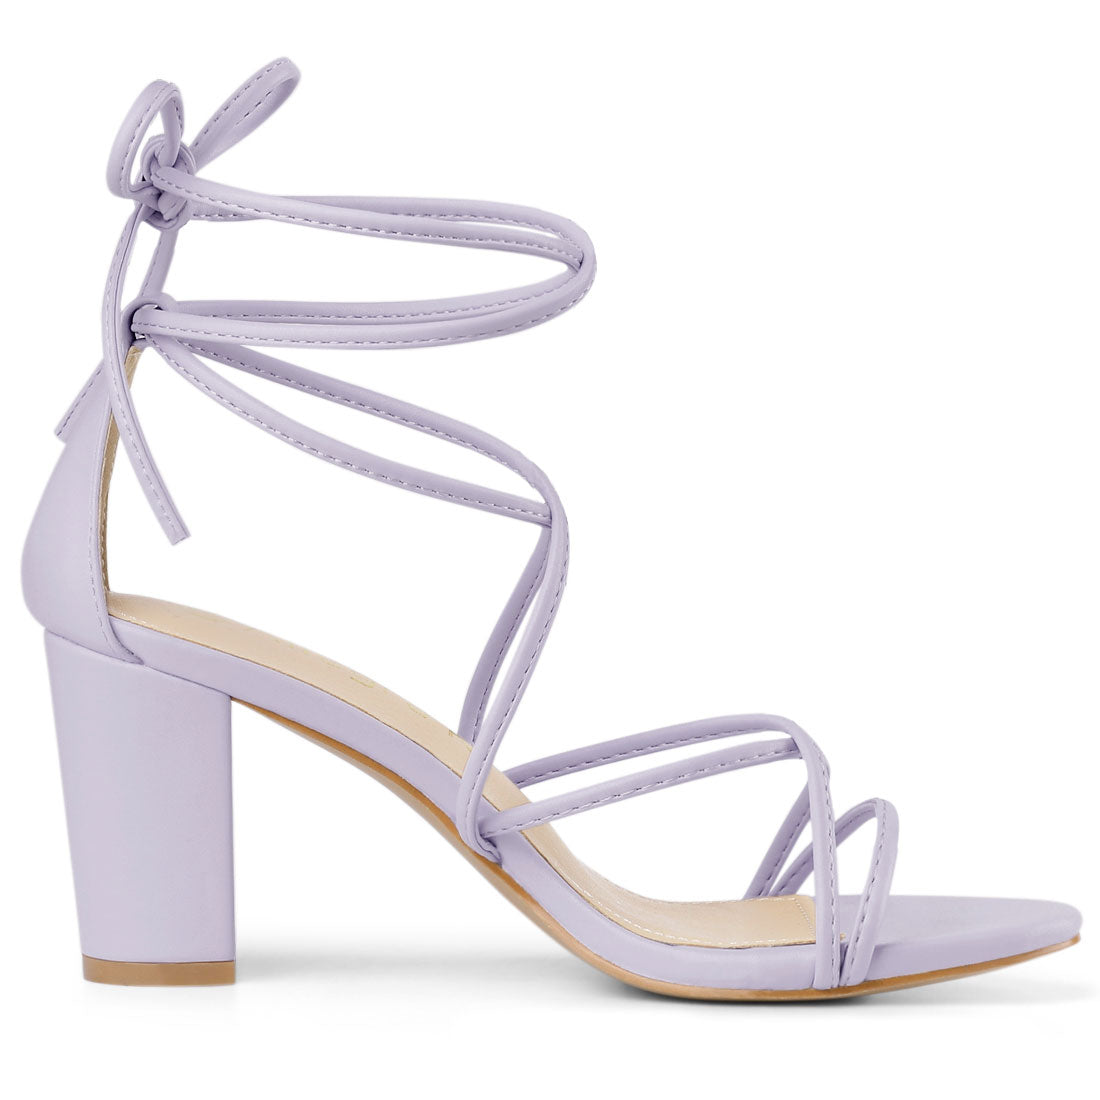 Allegra K Strappy Straps Lace Up Chunky Gold Heel Sandals Light Purple